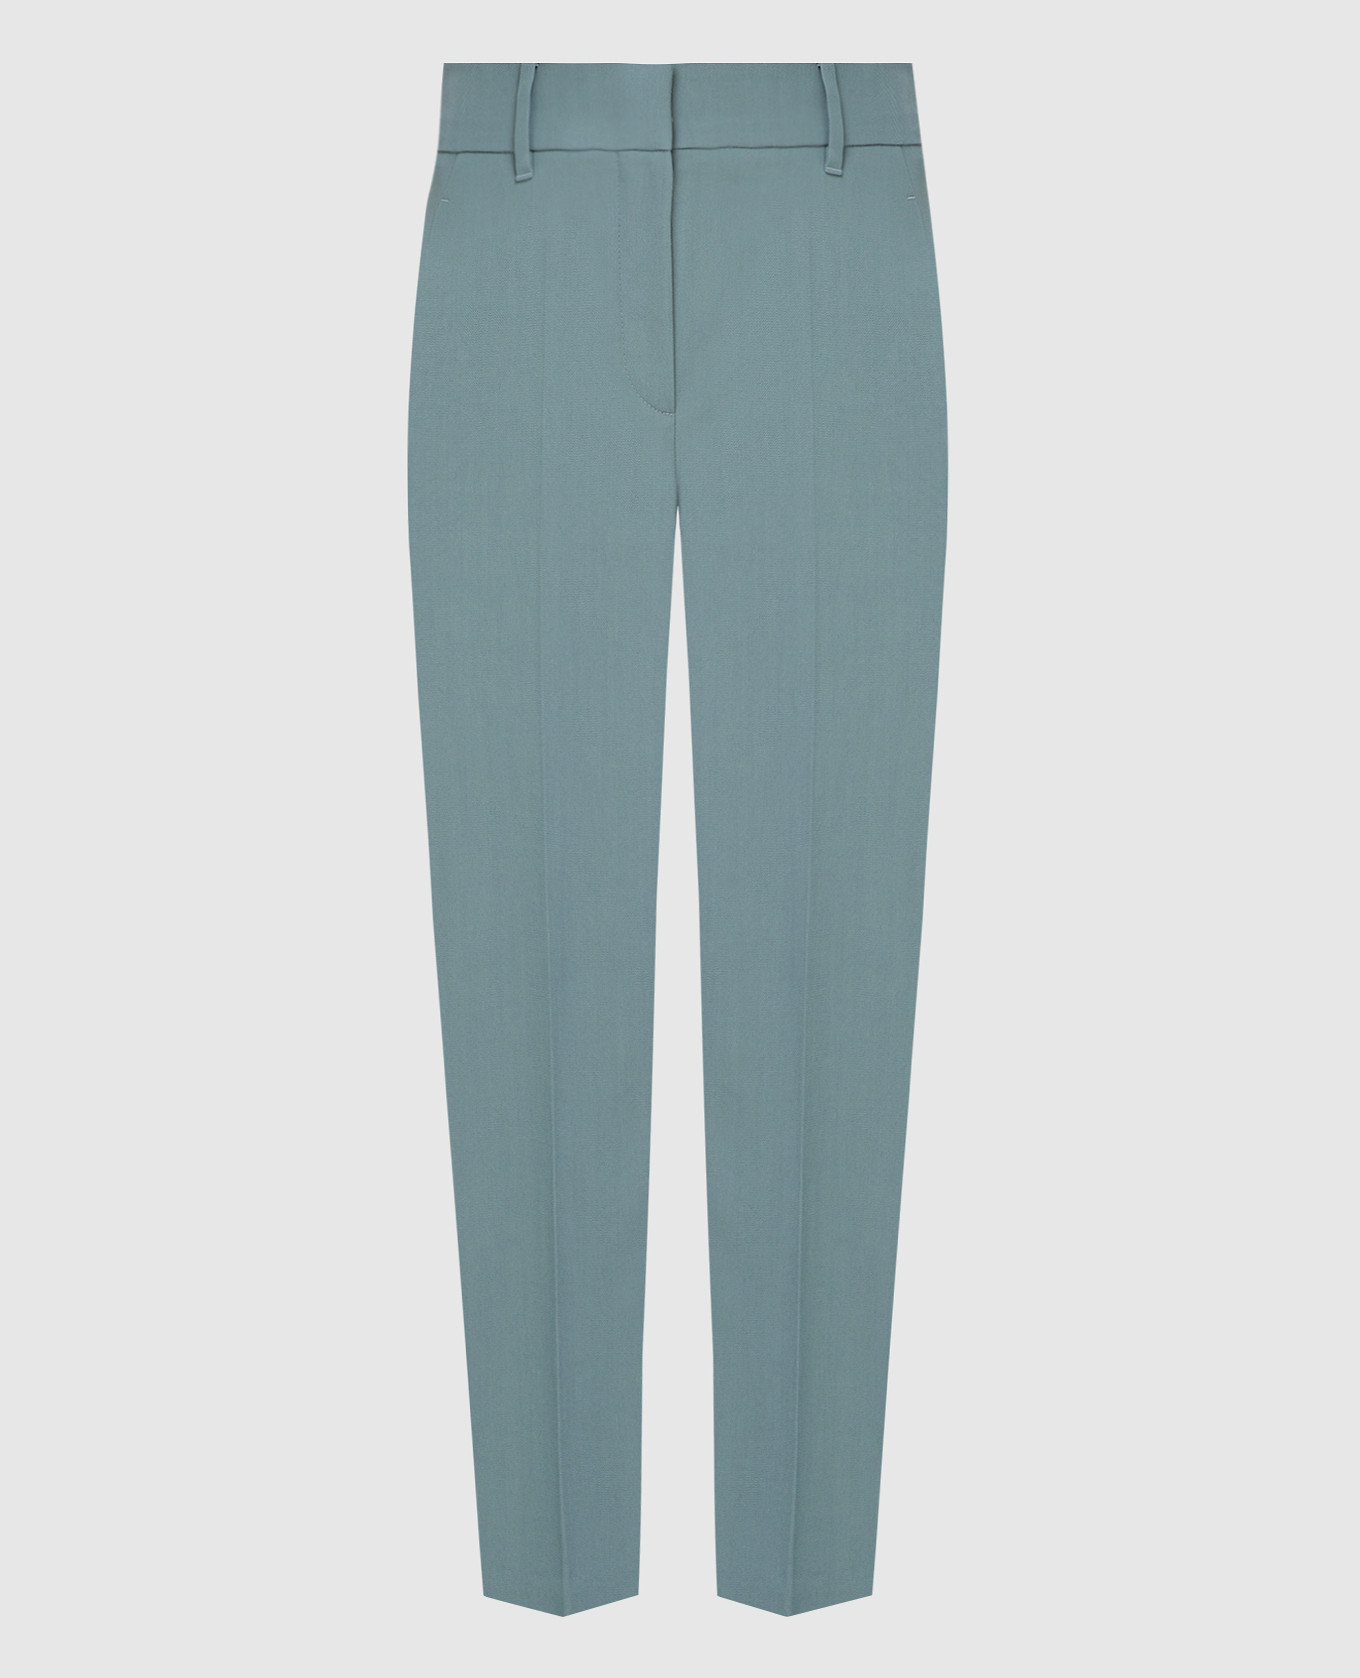 Turquoise Wool Cropped Pants